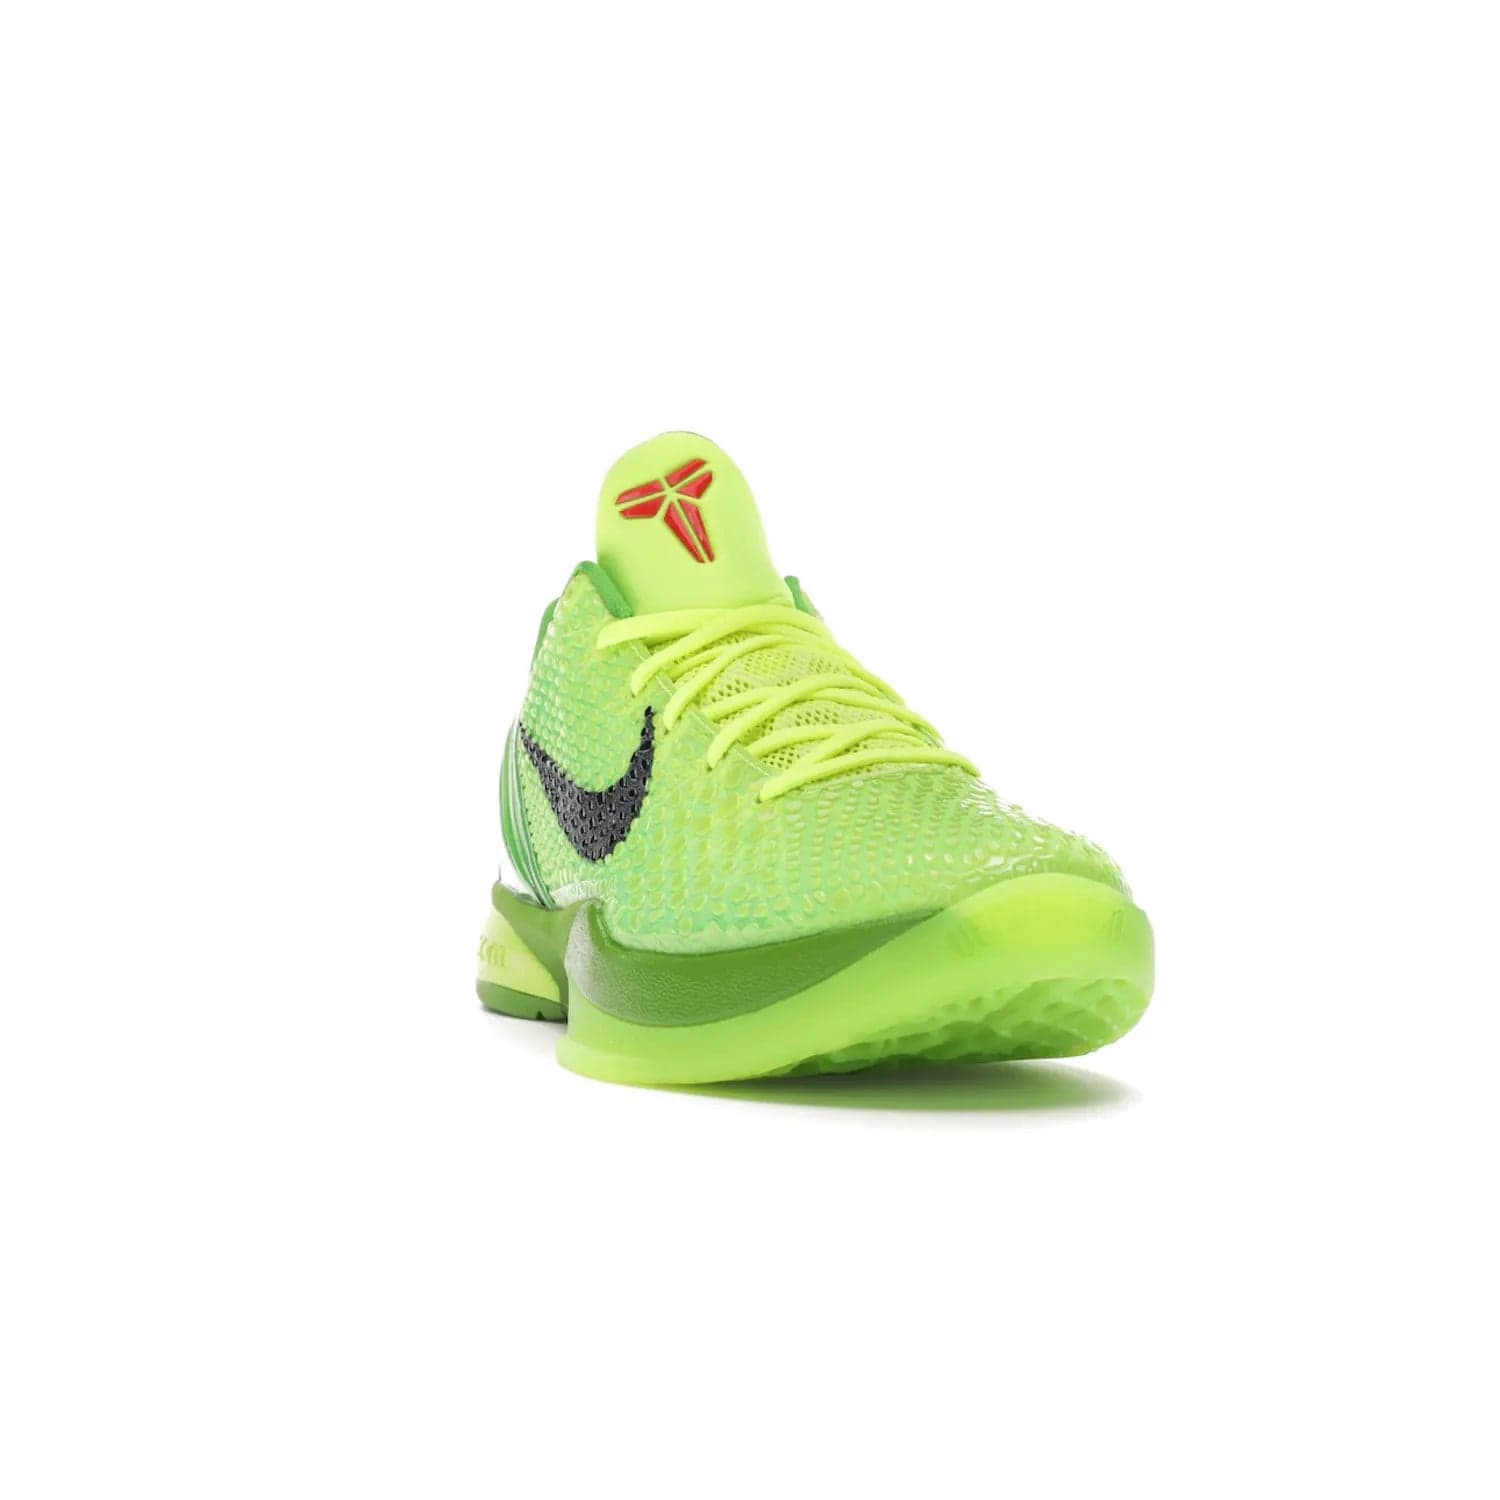 Nike Kobe 6 Protro Grinch (2020) - Image 8 - Only at www.BallersClubKickz.com - #
The Nike Kobe 6 Protro Grinch updates the iconic 2011 design with modern tech like a Zoom Air cushioning system, scaled-down traction, and updated silhouette. Experience the textured Green Apple and Volt upper plus bright red and green accents for $180.